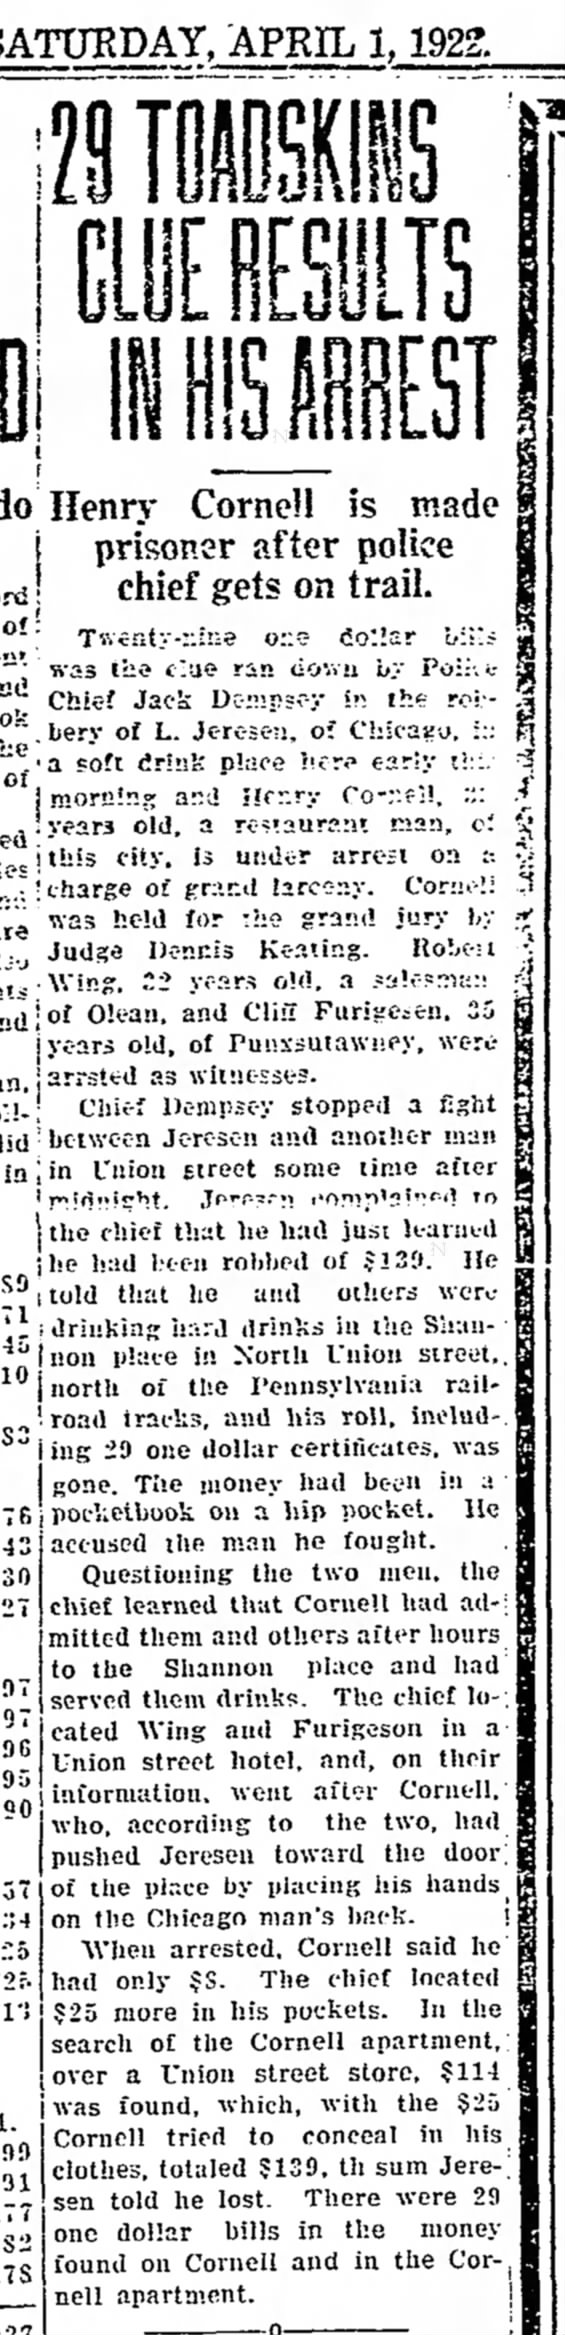 29 Toadskins Clue Results in His Arrest - Times Herald (Olean, NY) - 01 April 1922